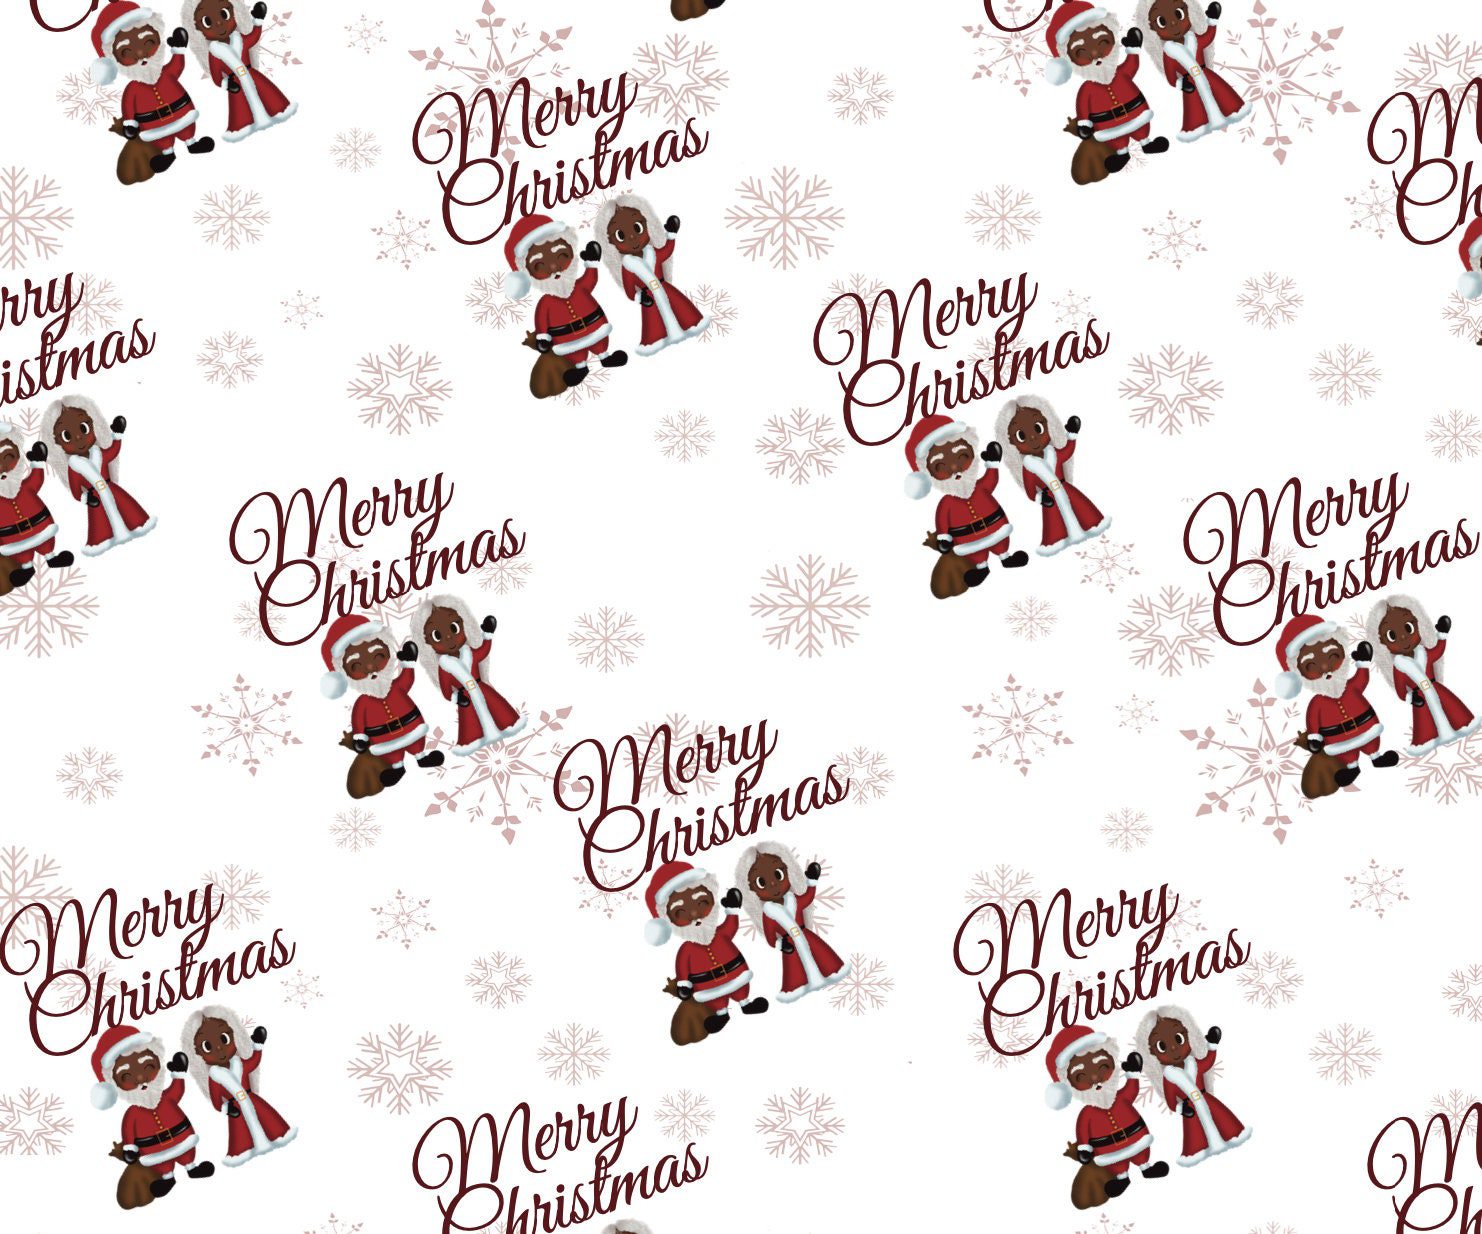 Black Santa and Mrs Claus Merry Christmas Wrapping Paper - Red writing